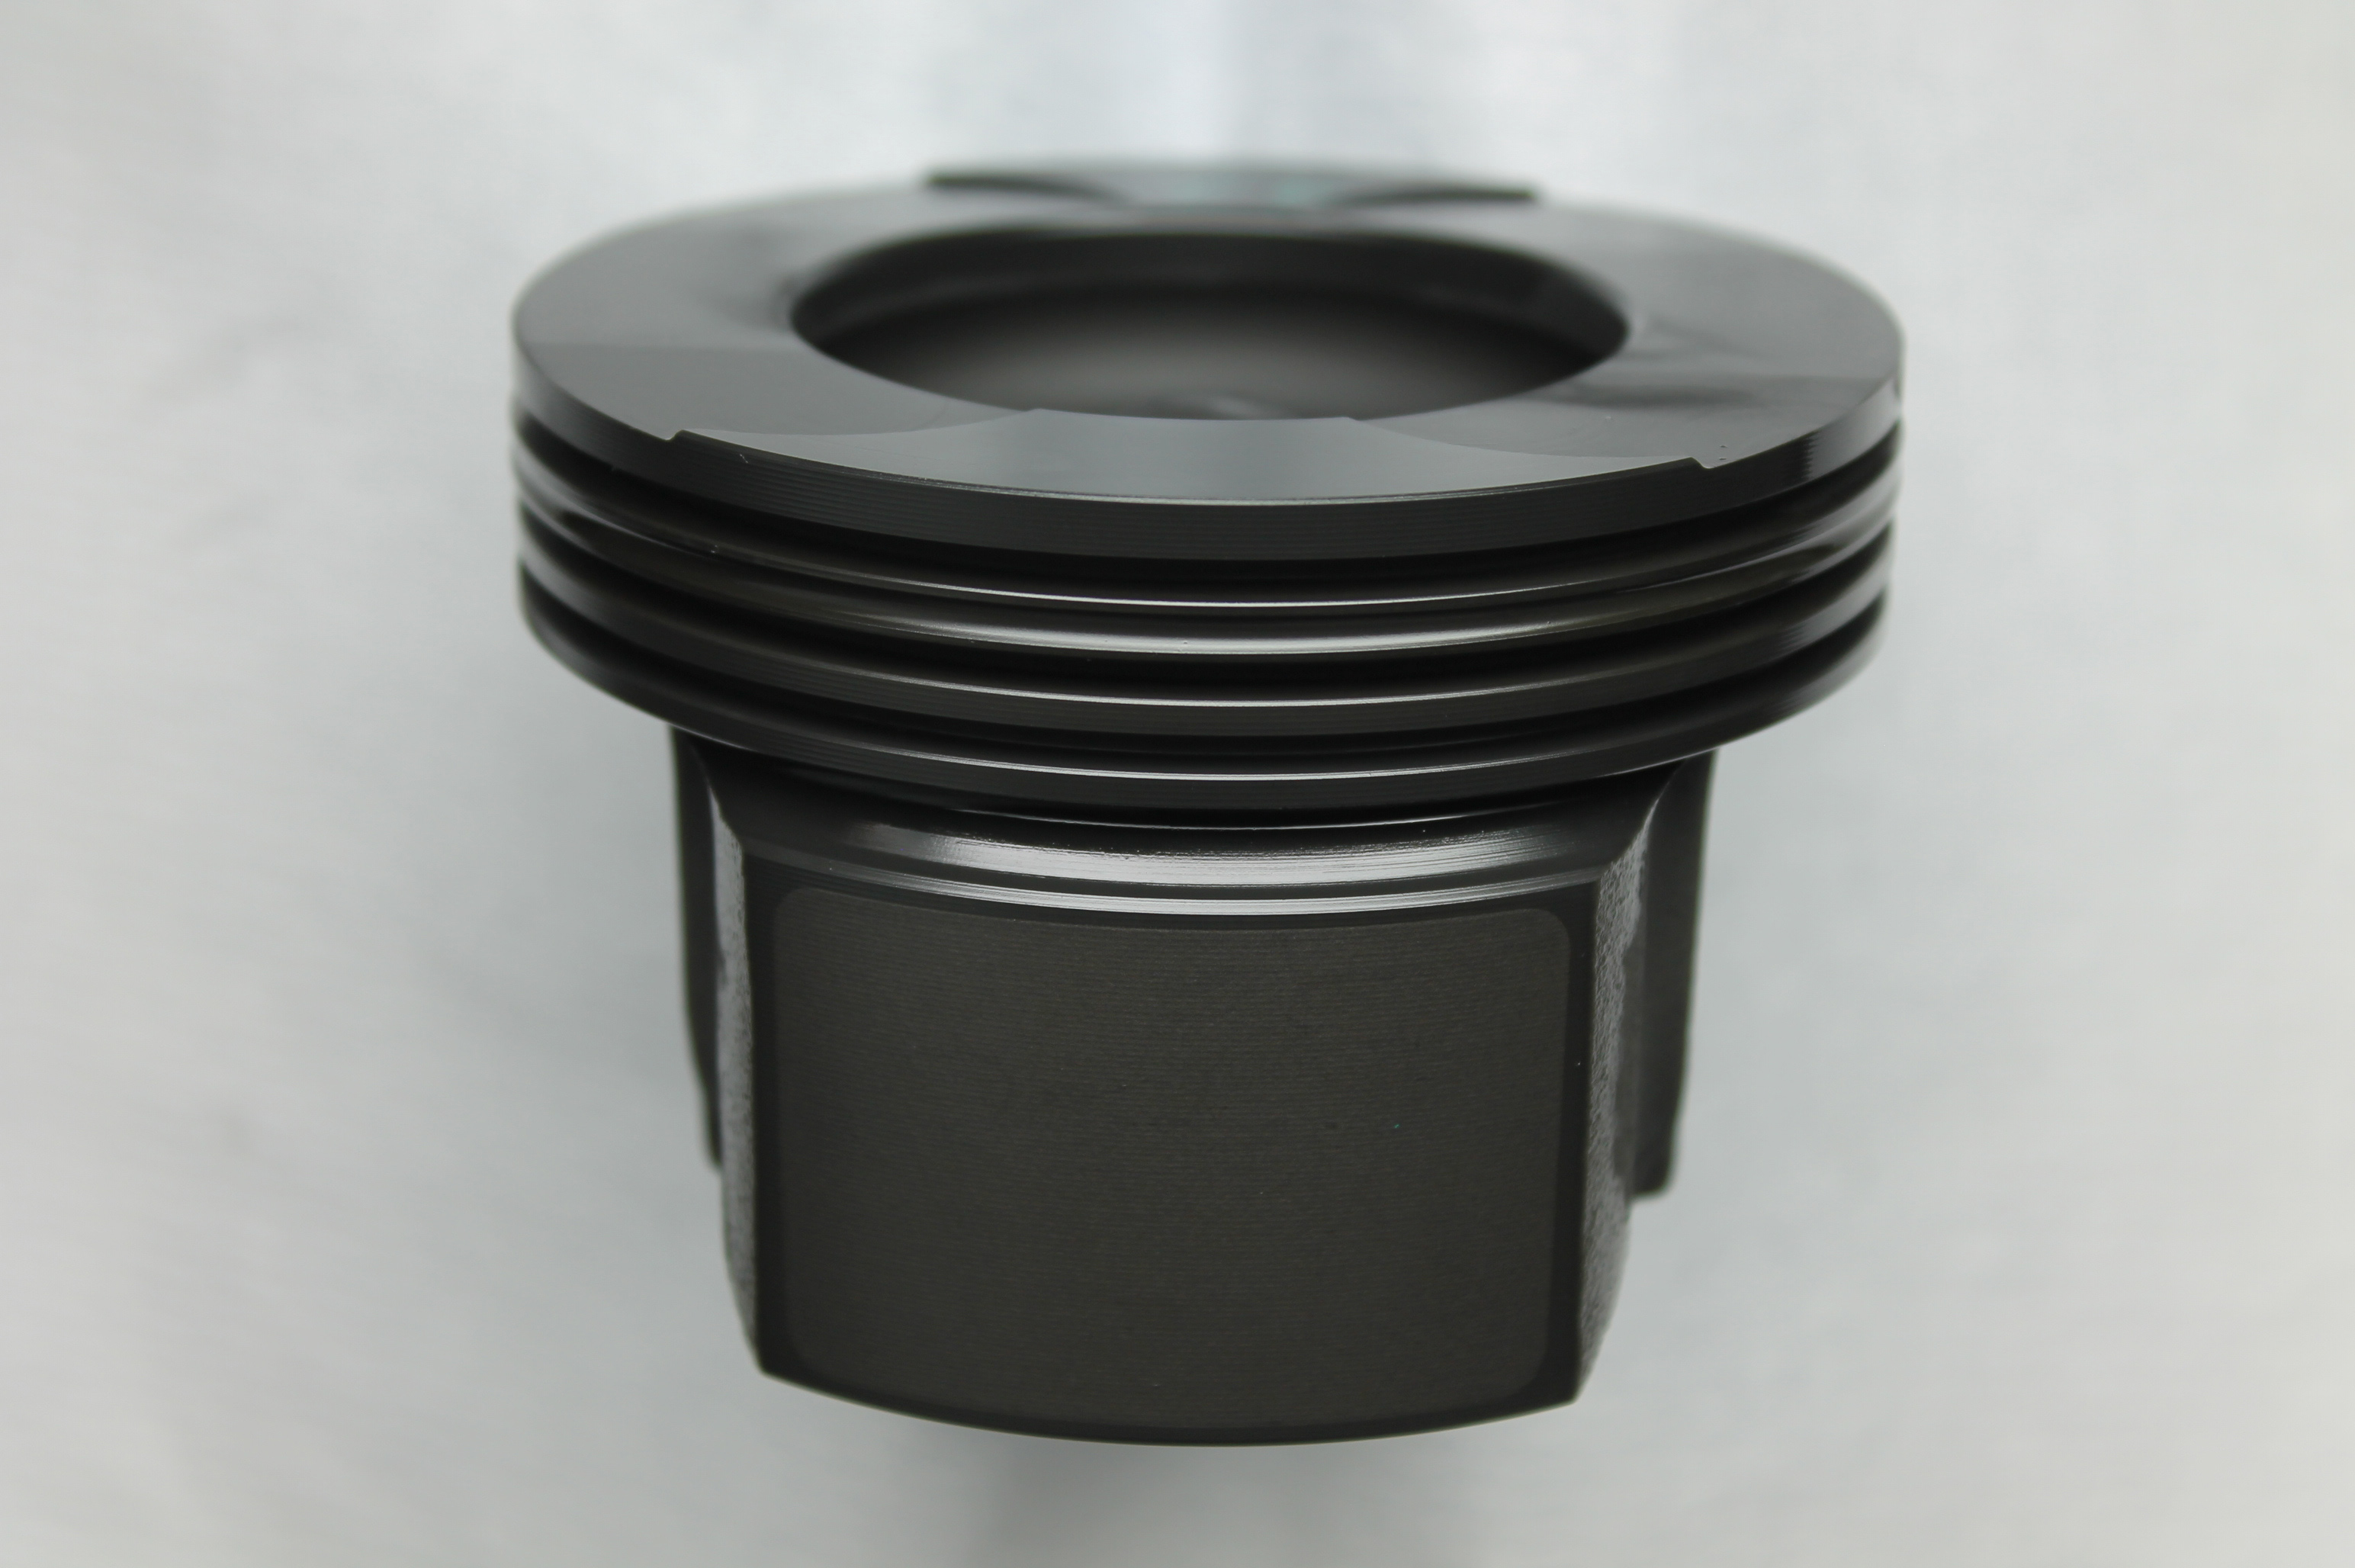 Passenger car steel piston with the new Federal-Mogul Powertrain EcoTough-D skirt coating for diesel applications.JPG